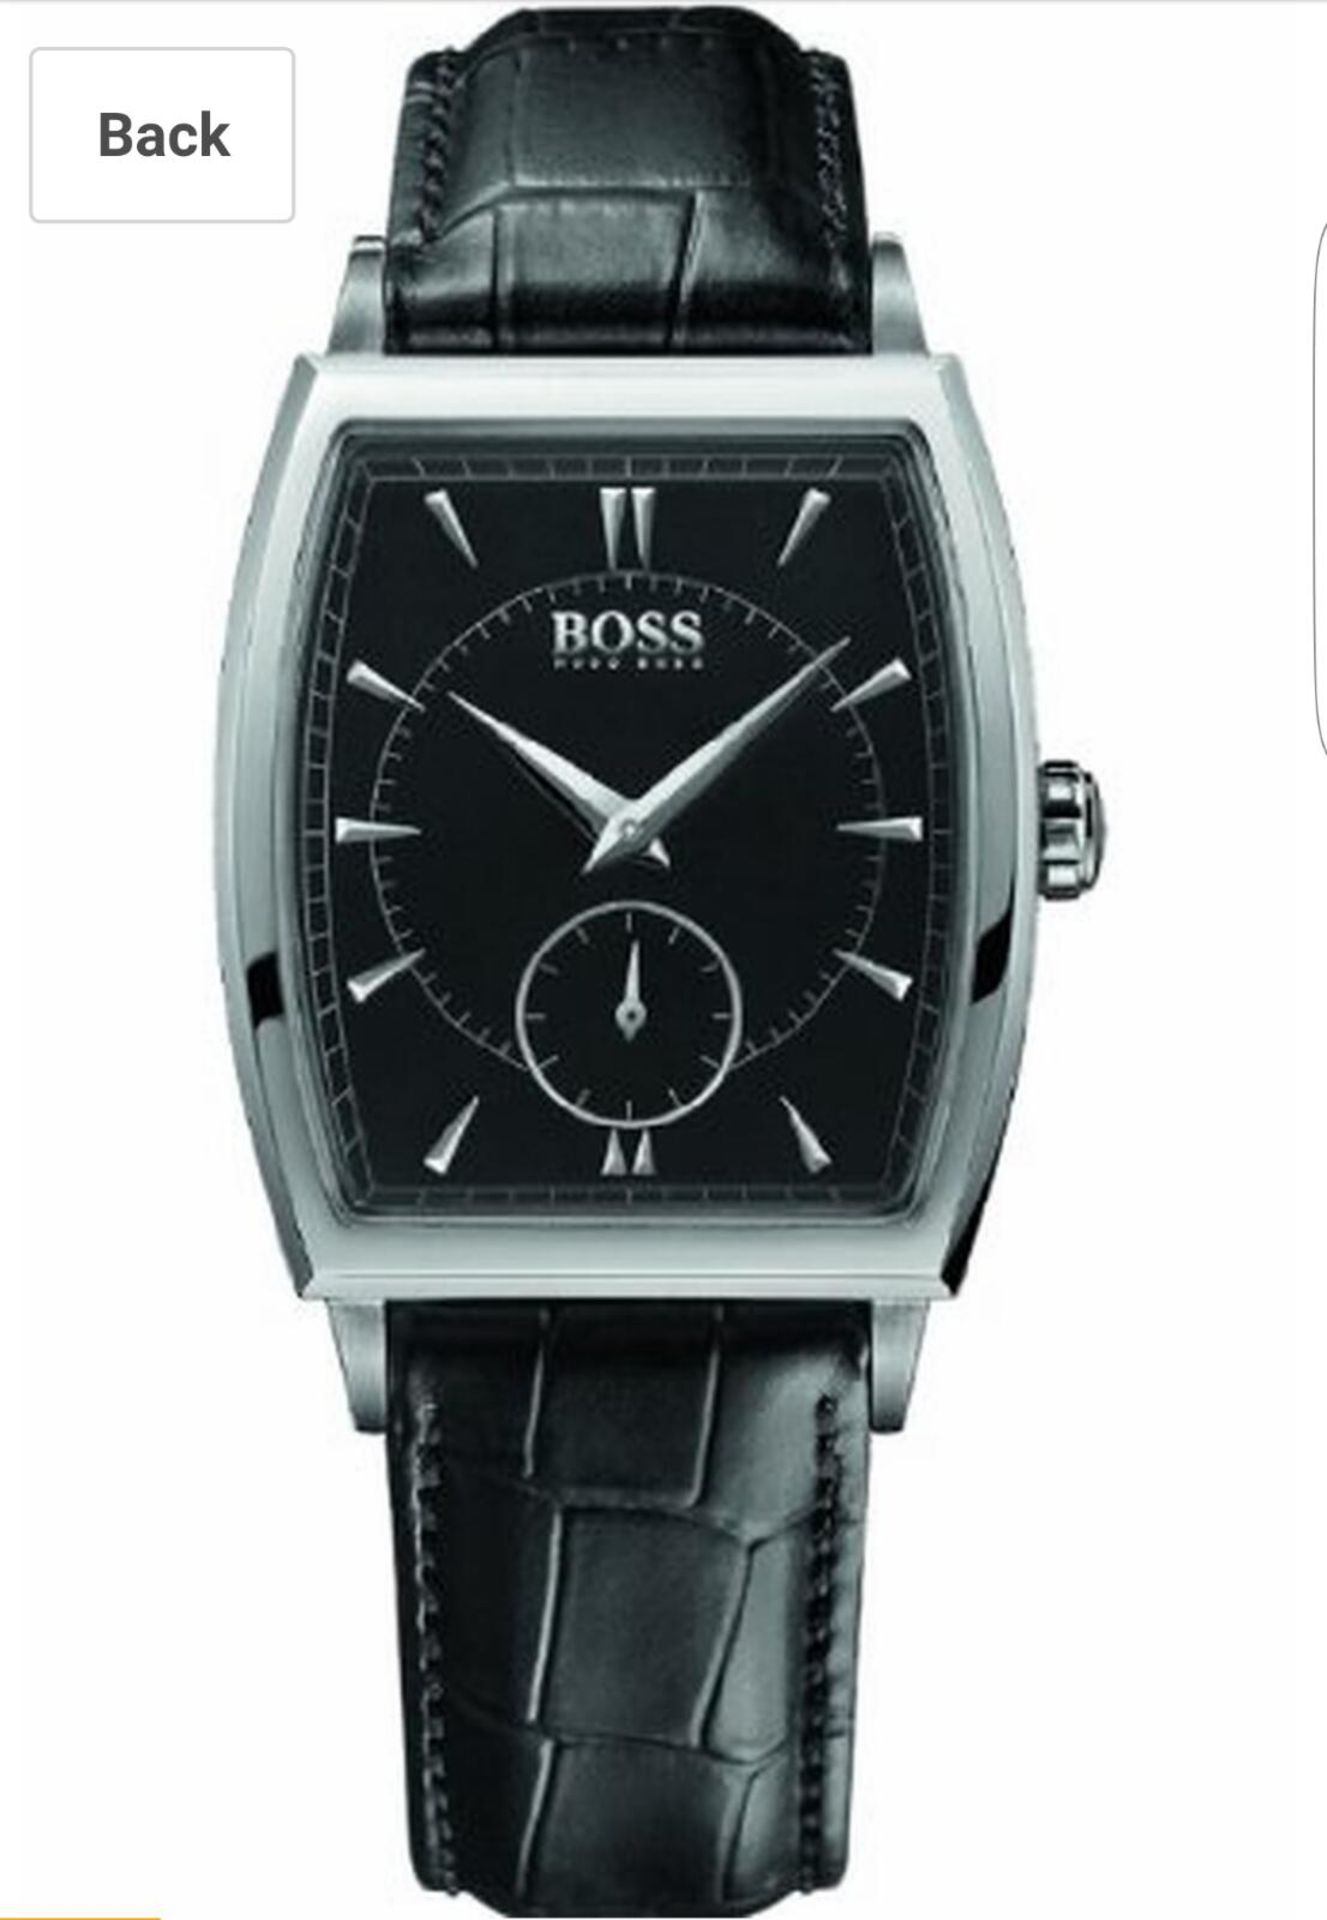 BRAND NEW HUGO BOSS 1512845, GENTS DESIGNER WATCH, COMPLETE WITH ORIGINAL BOX AND MANUAL - RRP £499